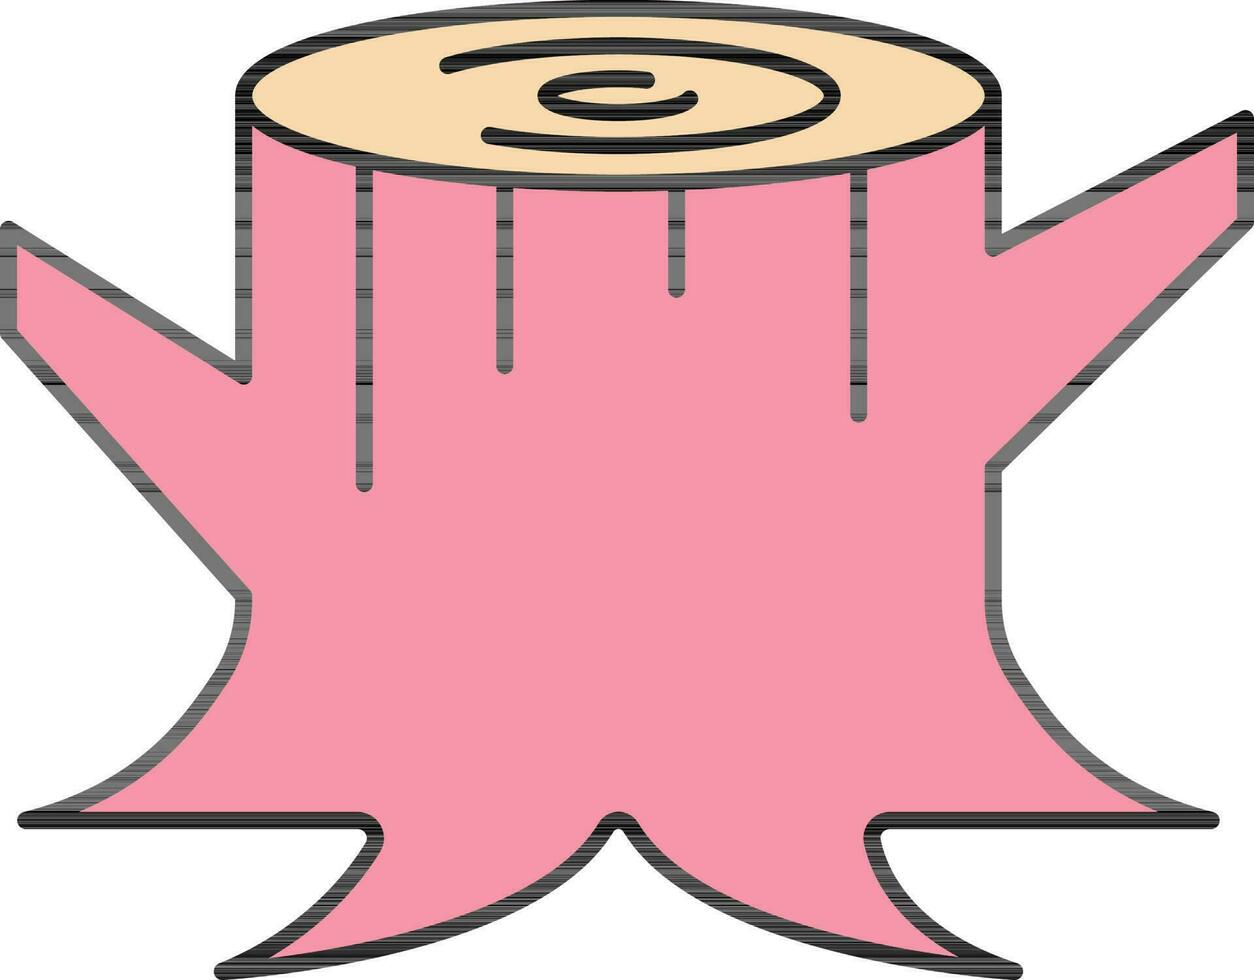 Tree Stump Icon In Pink Color. vector